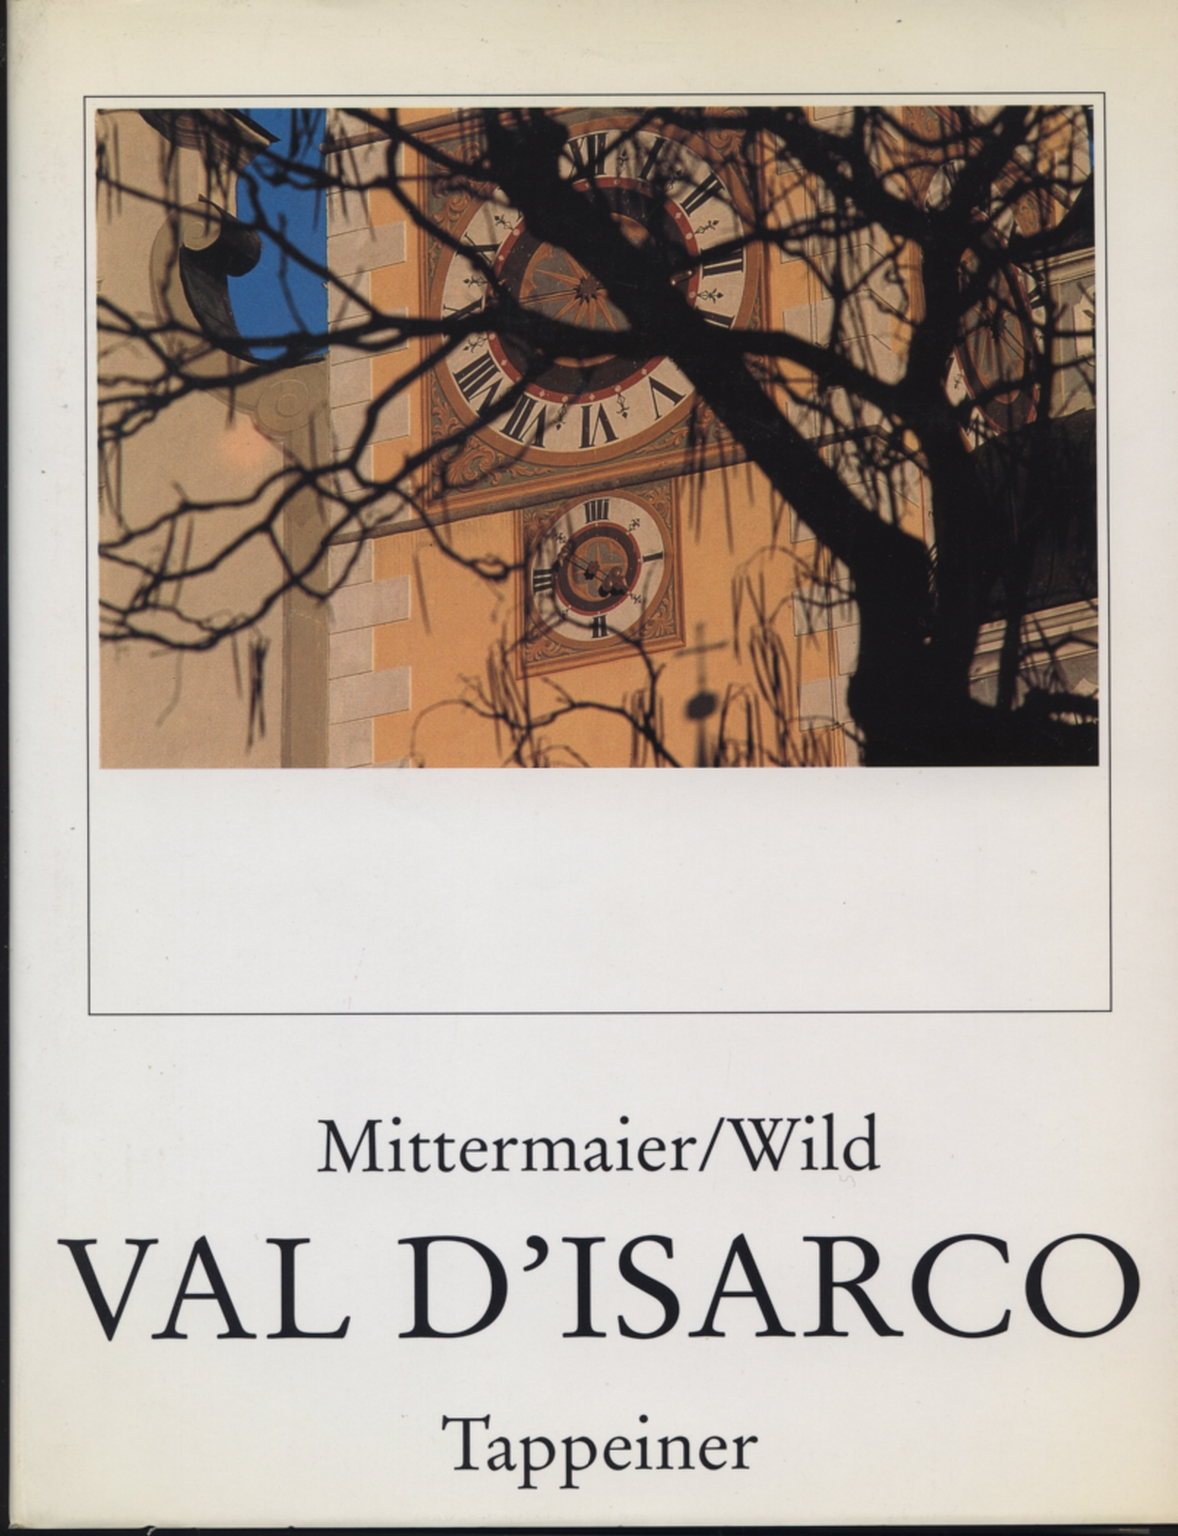 Val d'isarco, Karl Mittermaier, Carla Sauvage